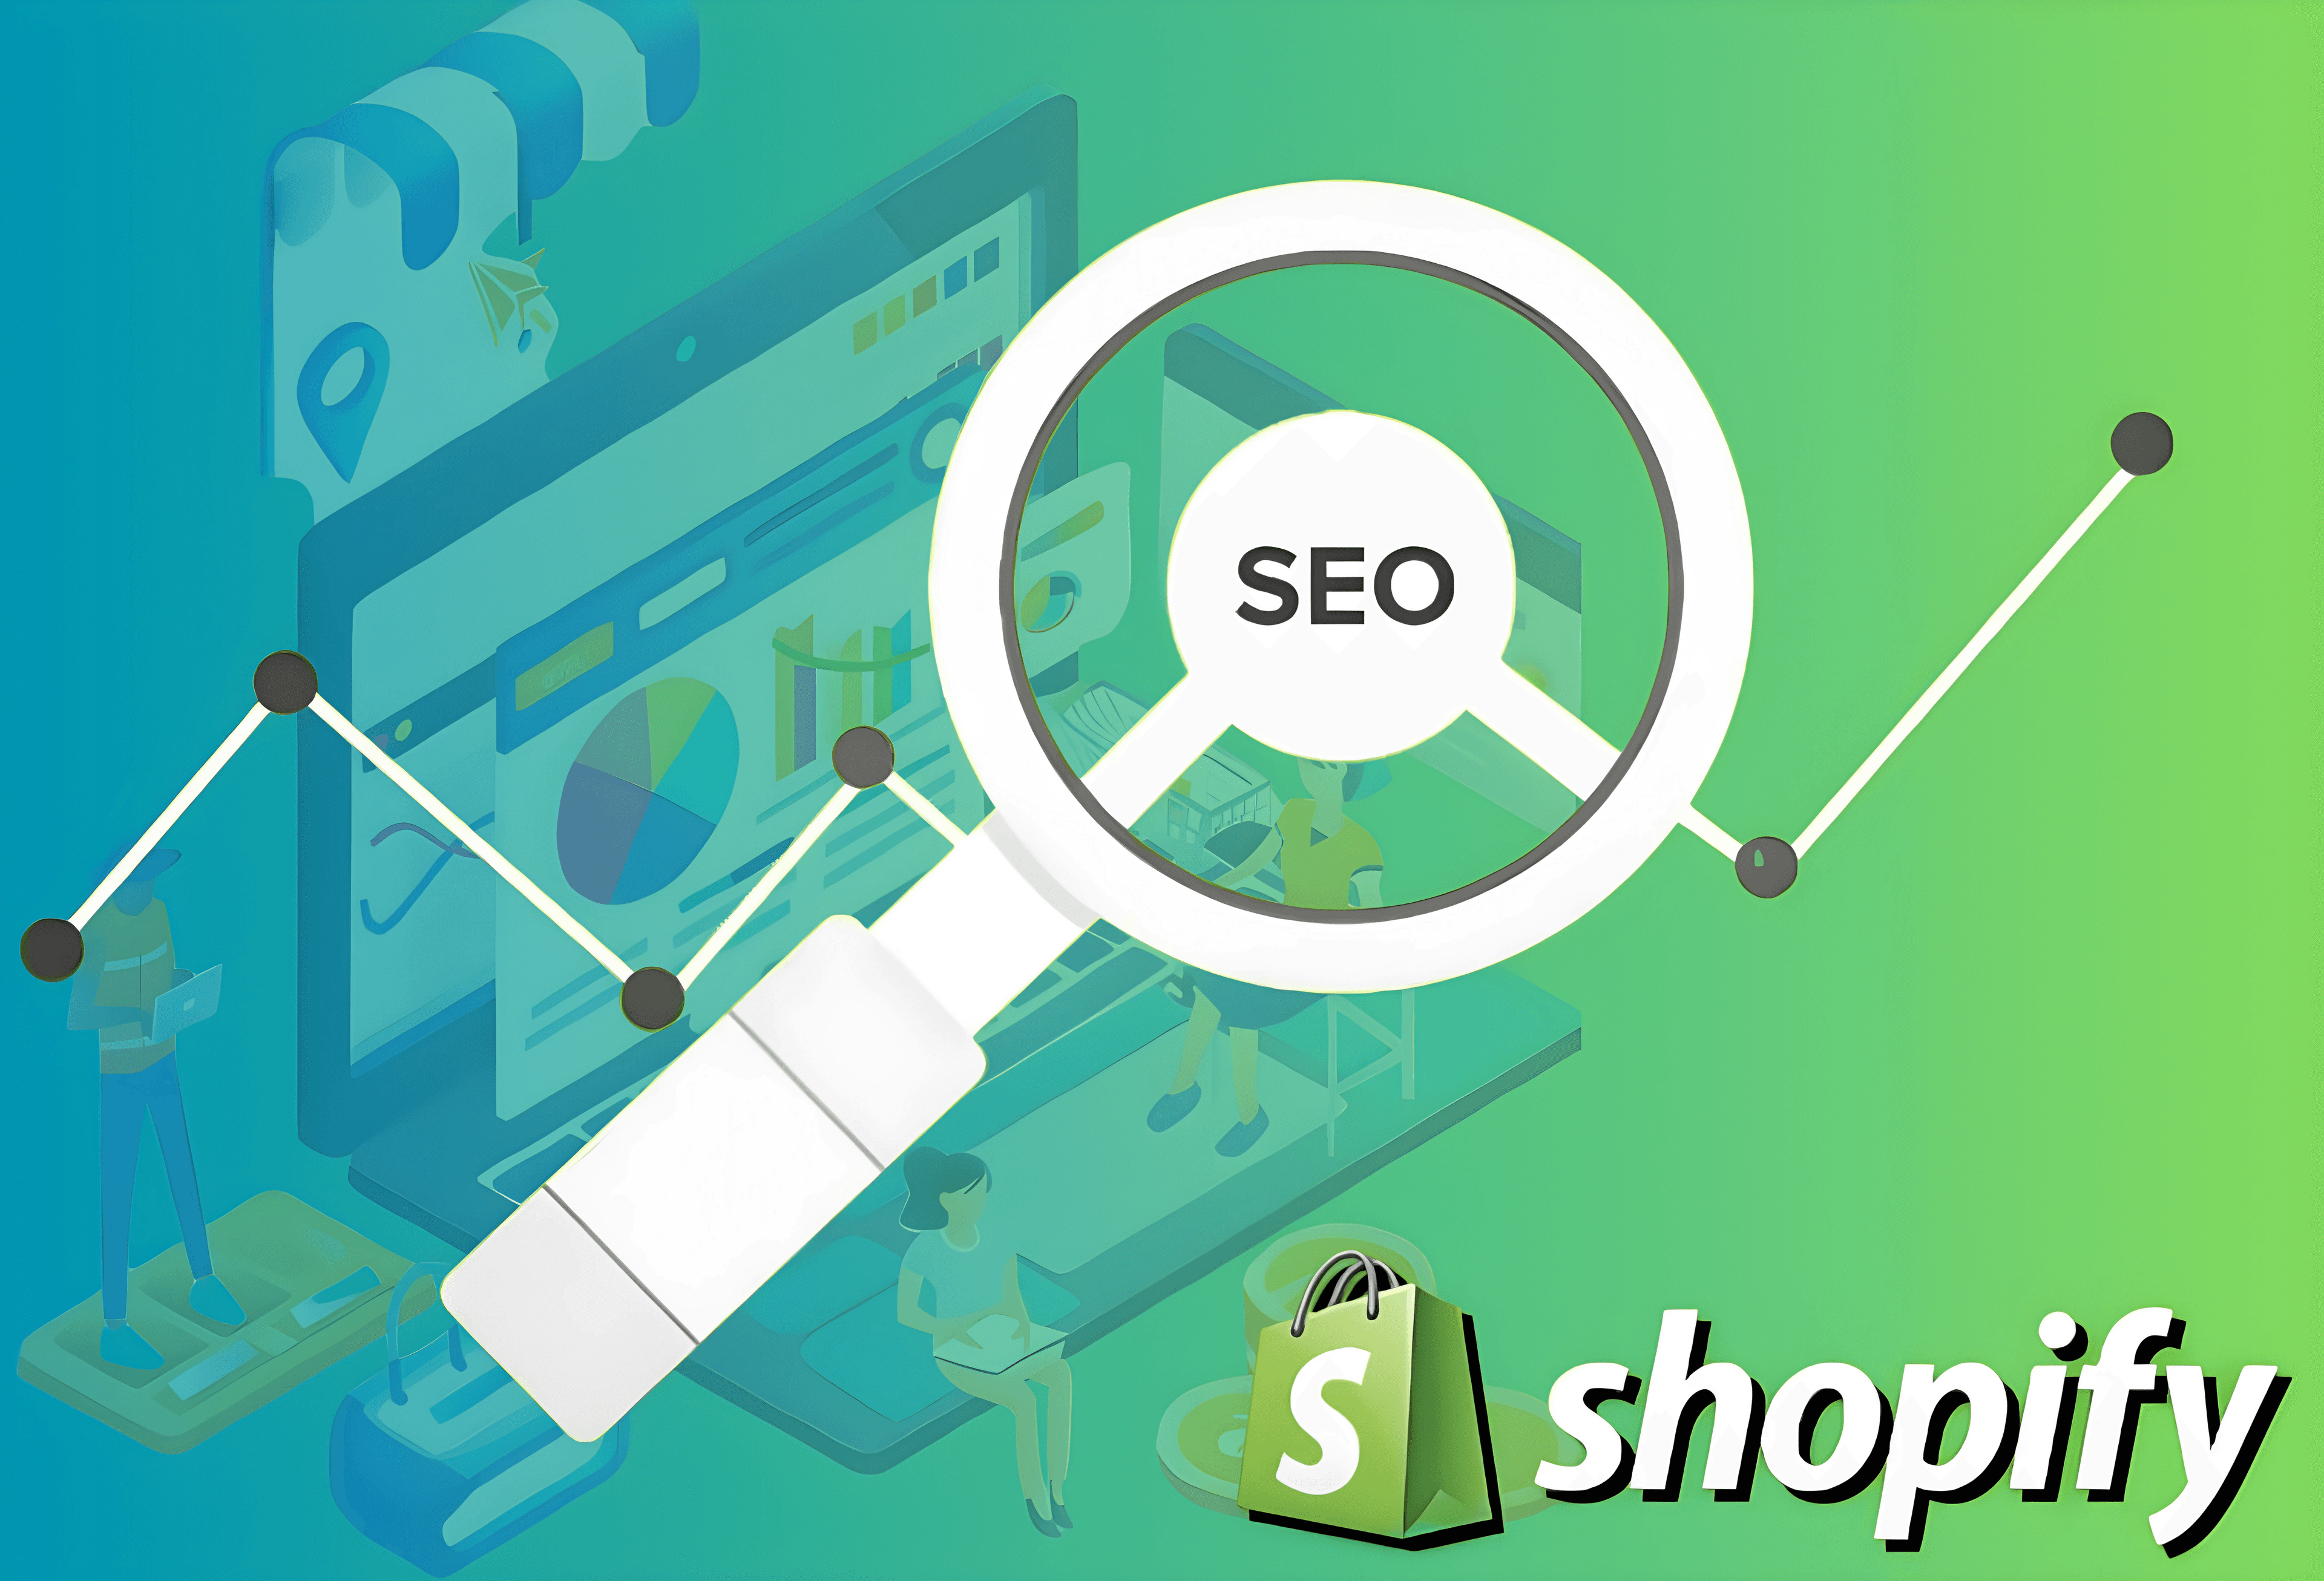 Essential Shopify SEO Tips to Transform Your Online Store into a High-Traffic, Revenue-Generating Machine